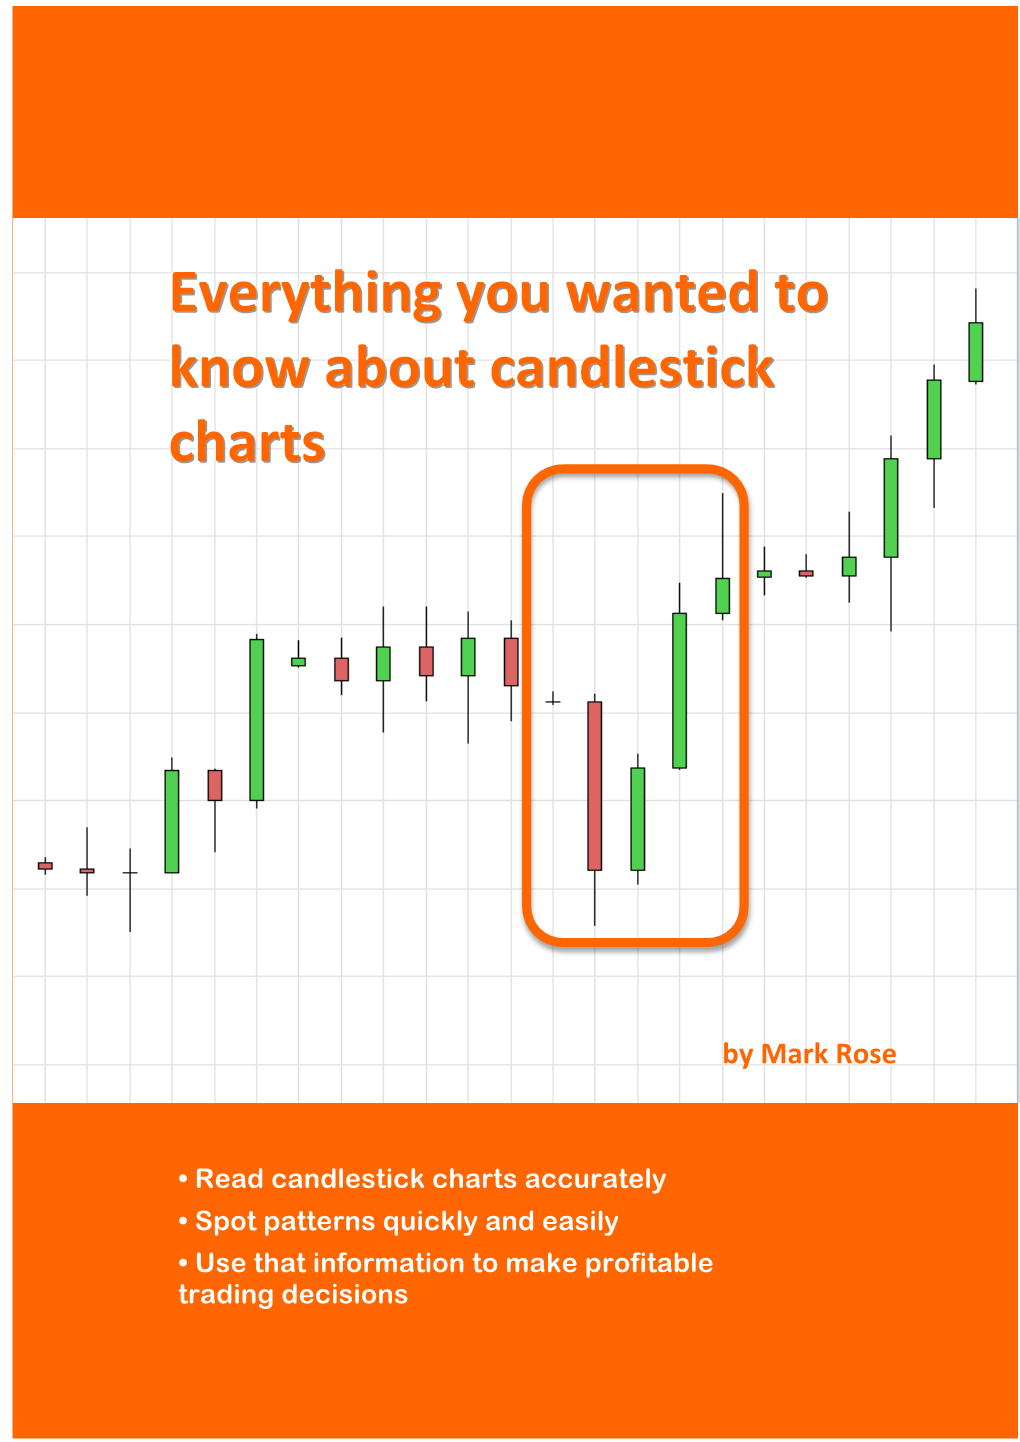 Everything You Wanted to Know About Candlestick Charts Is an Unregulated Product Published by Thames Publishing Ltd